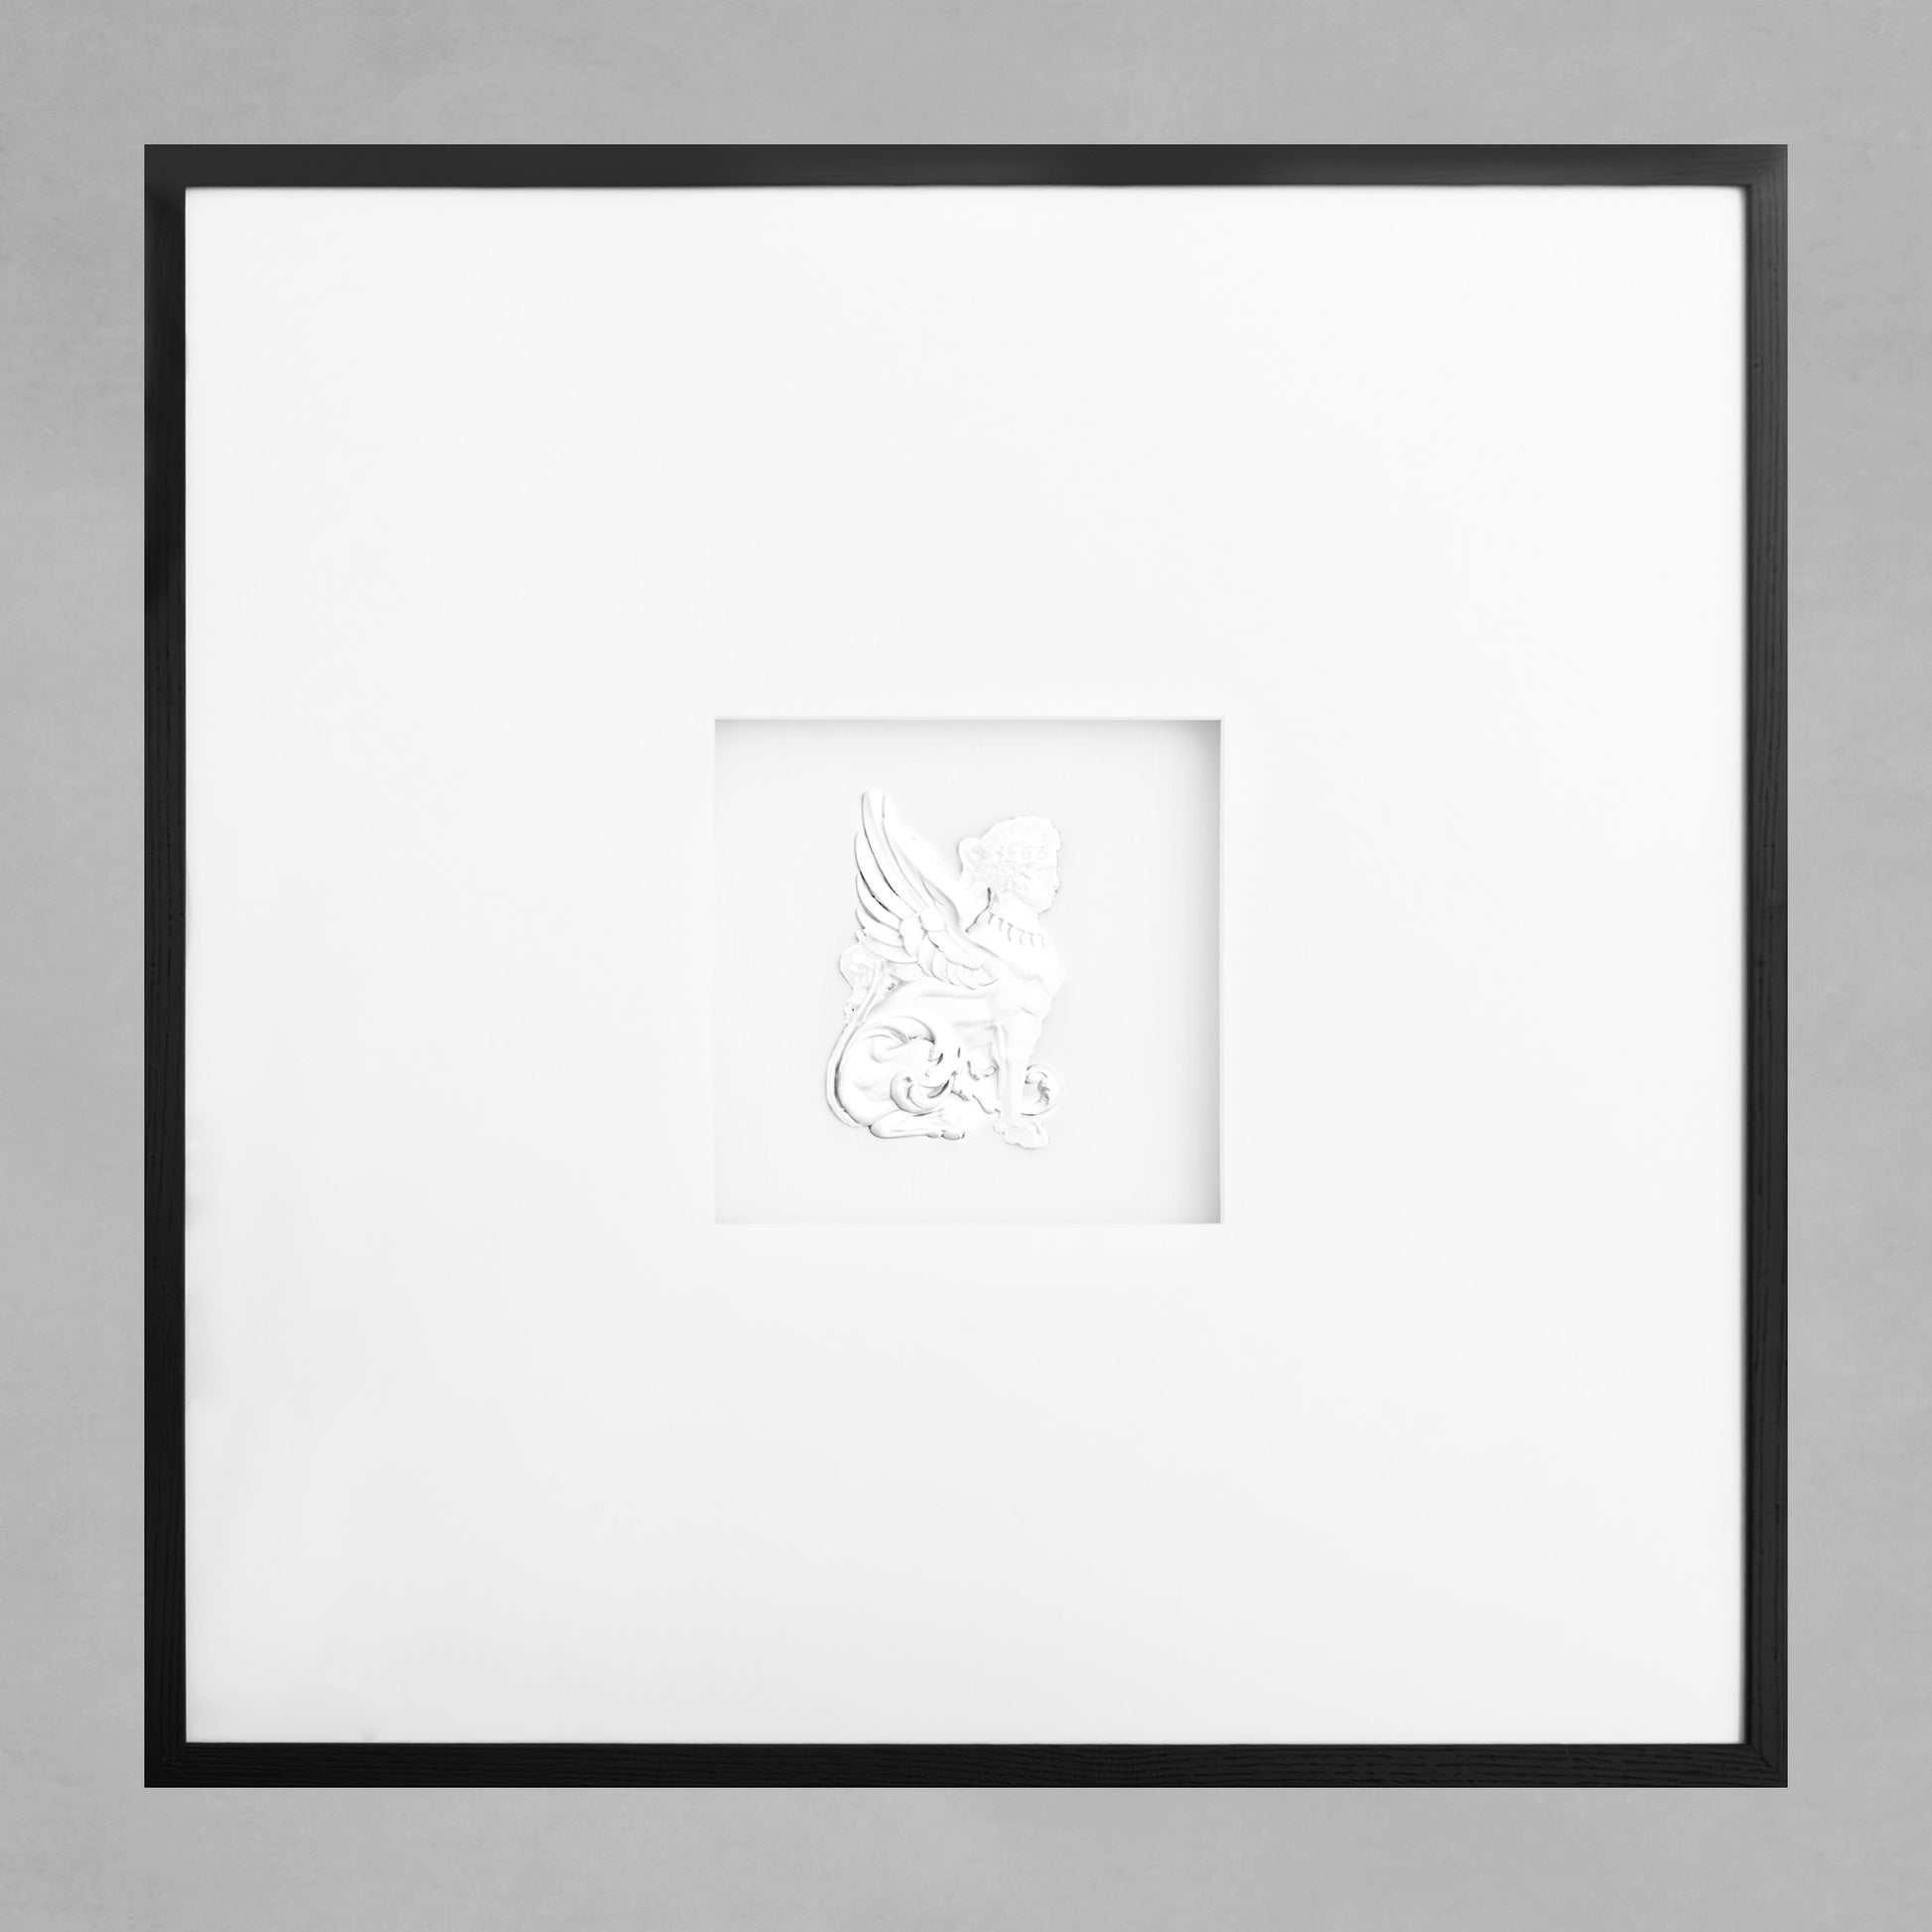 Contemporary framed griffin artwork with gray background.